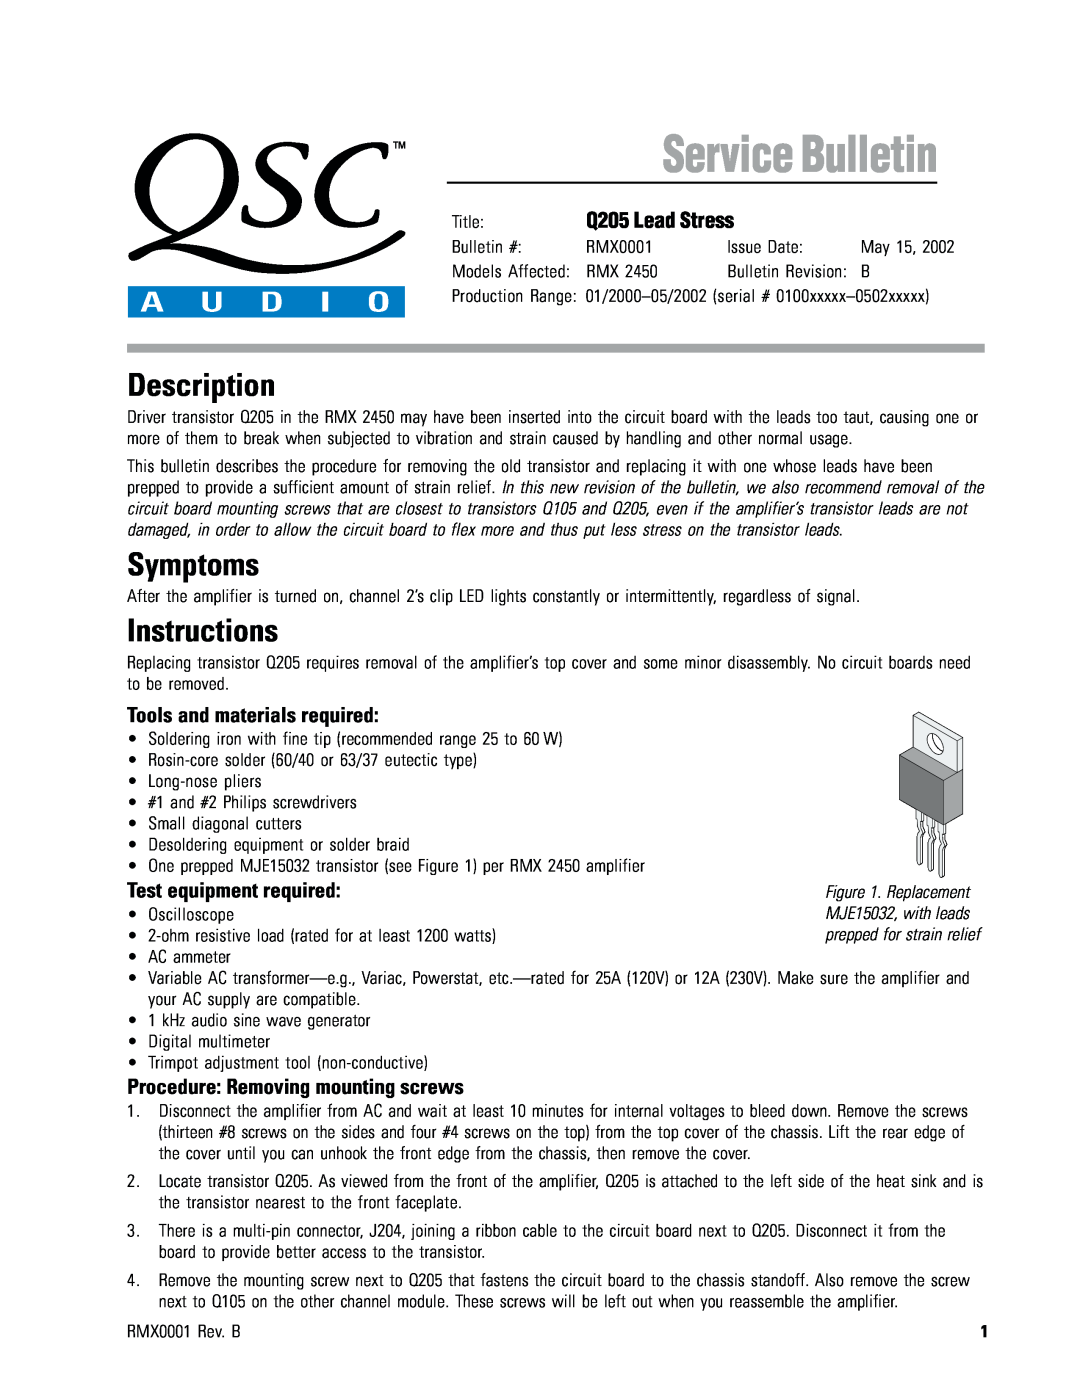 QSC Audio manual Q205 Lead Stress, Tools and materials required, Test equipment required, Service Bulletin, Description 